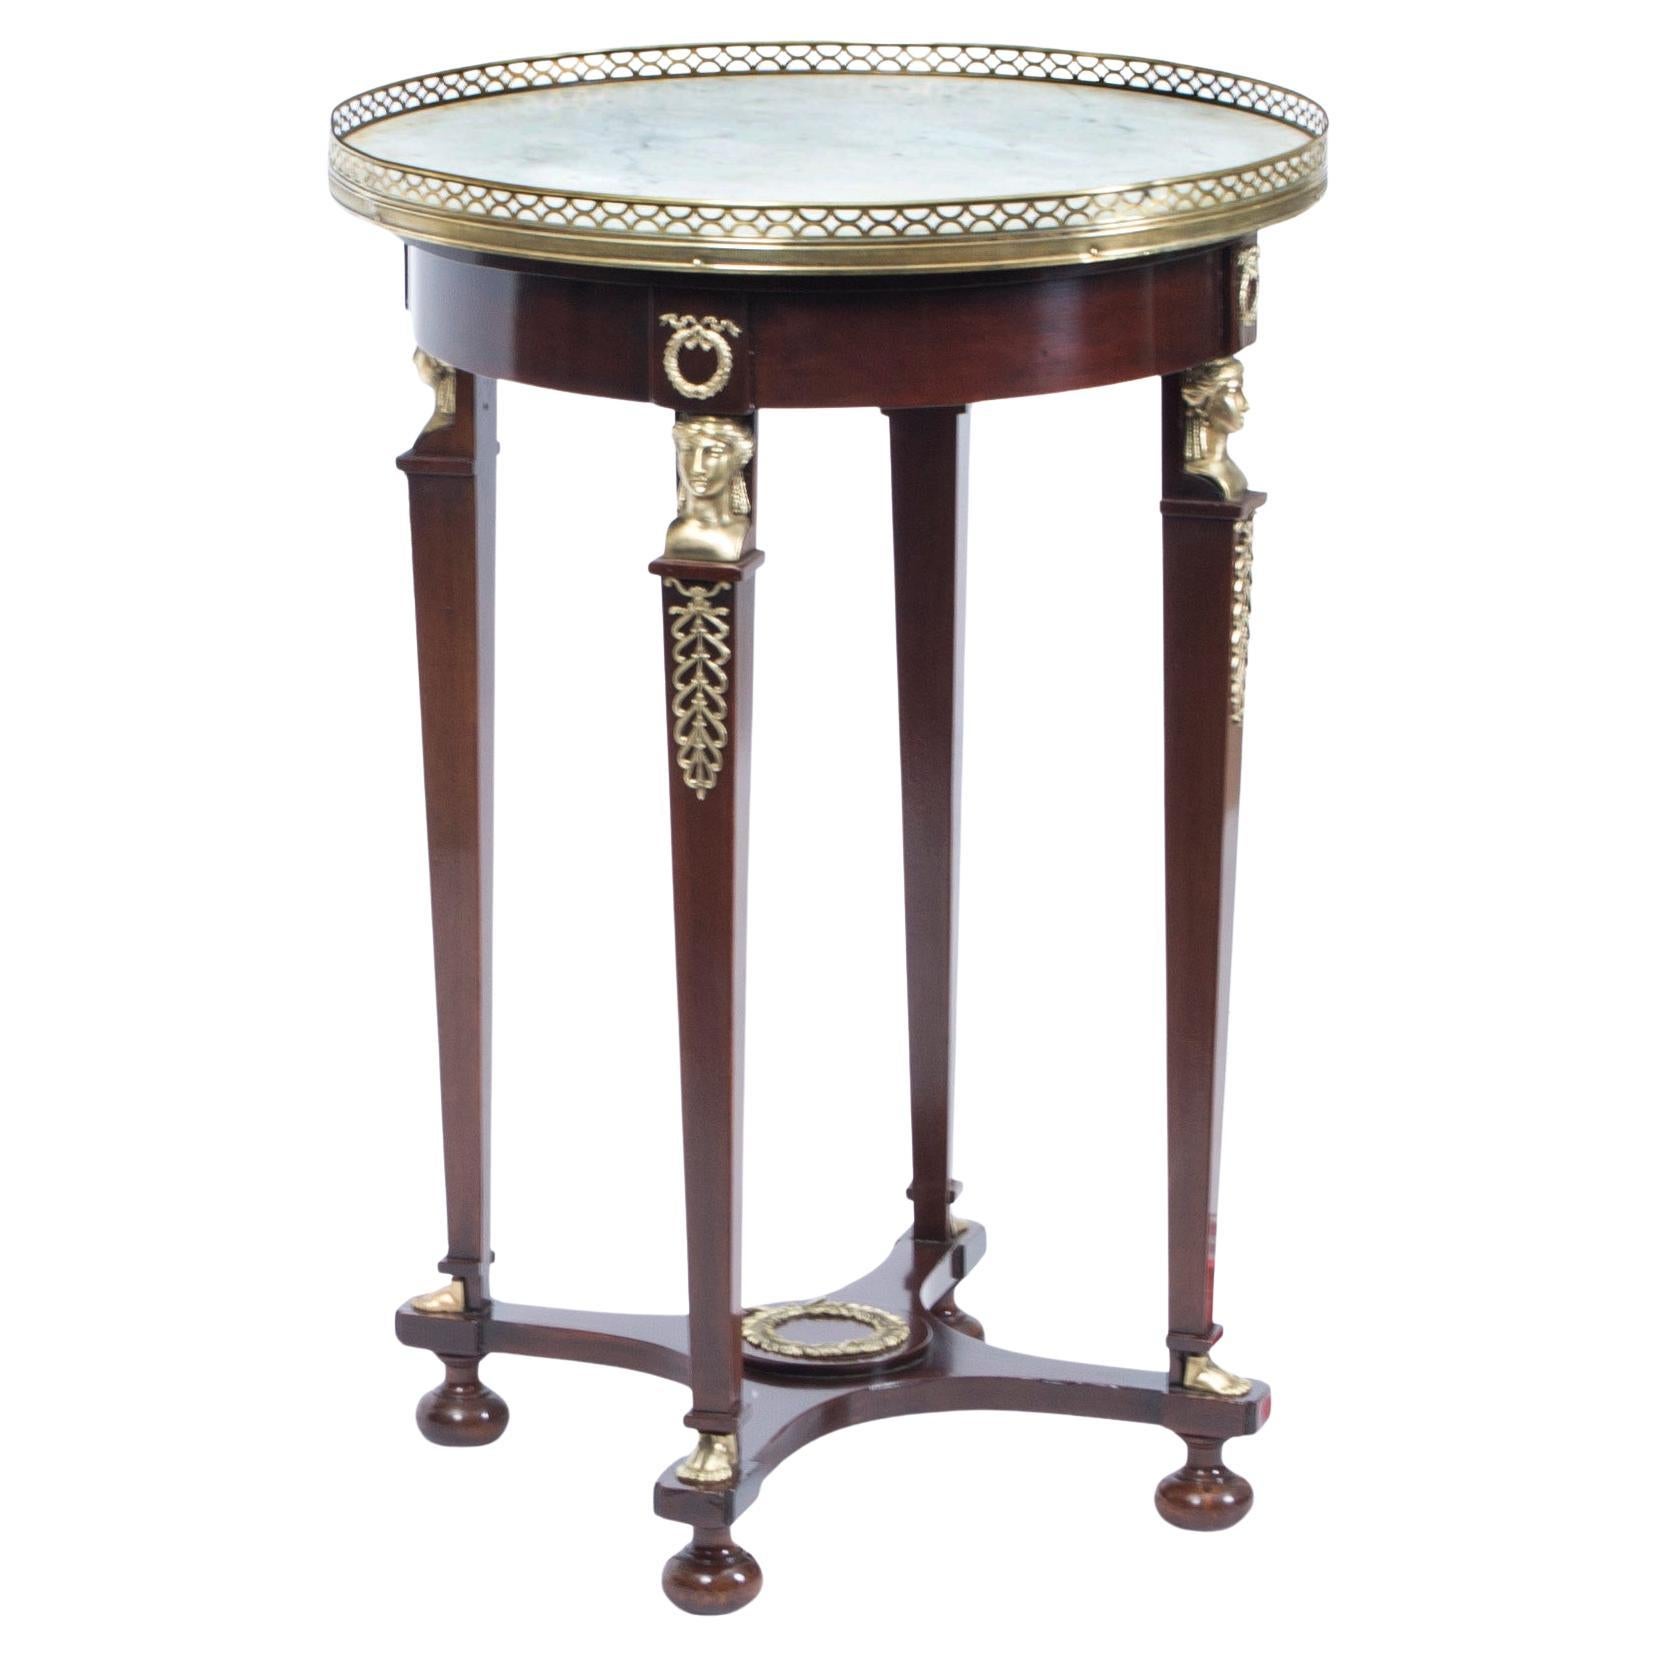 Antique French Empire Marble & Ormolu Occasional Table 19th Century For Sale